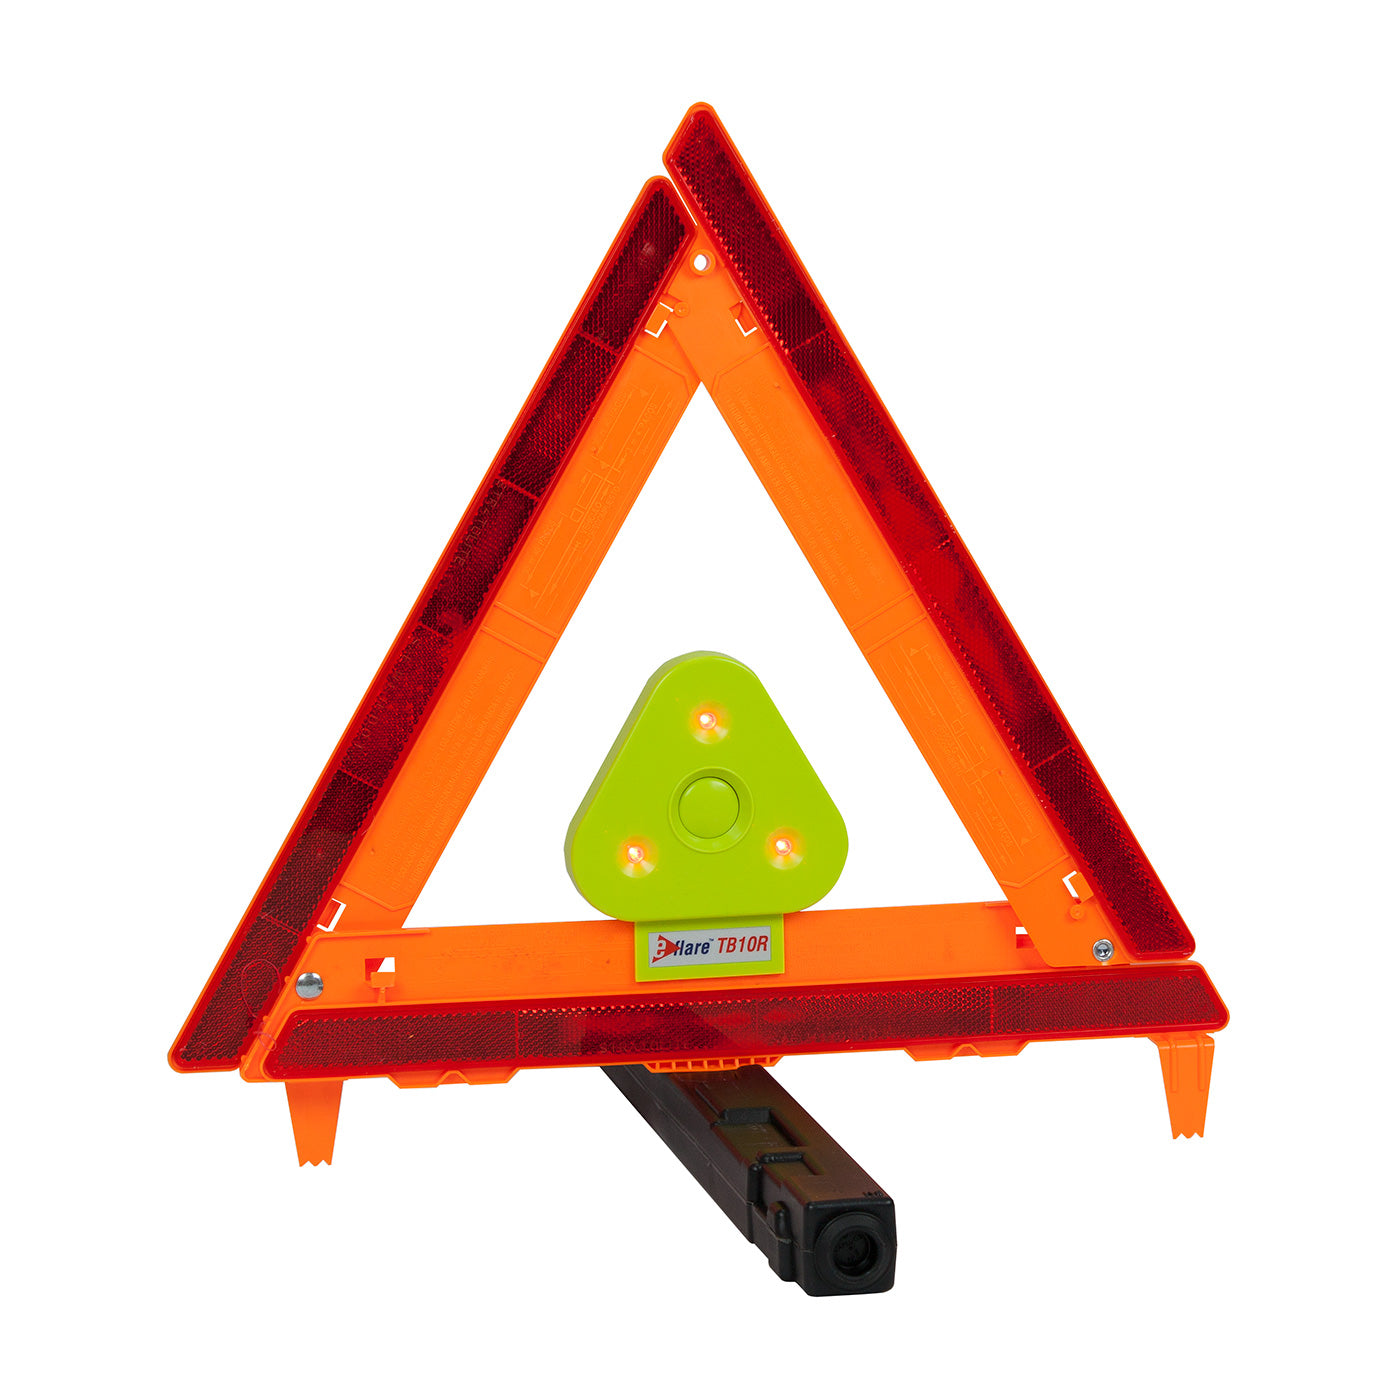 Protective Industrial Products-E-FLARE BEACON FOR SAFETY TRIANGLE-eSafety Supplies, Inc